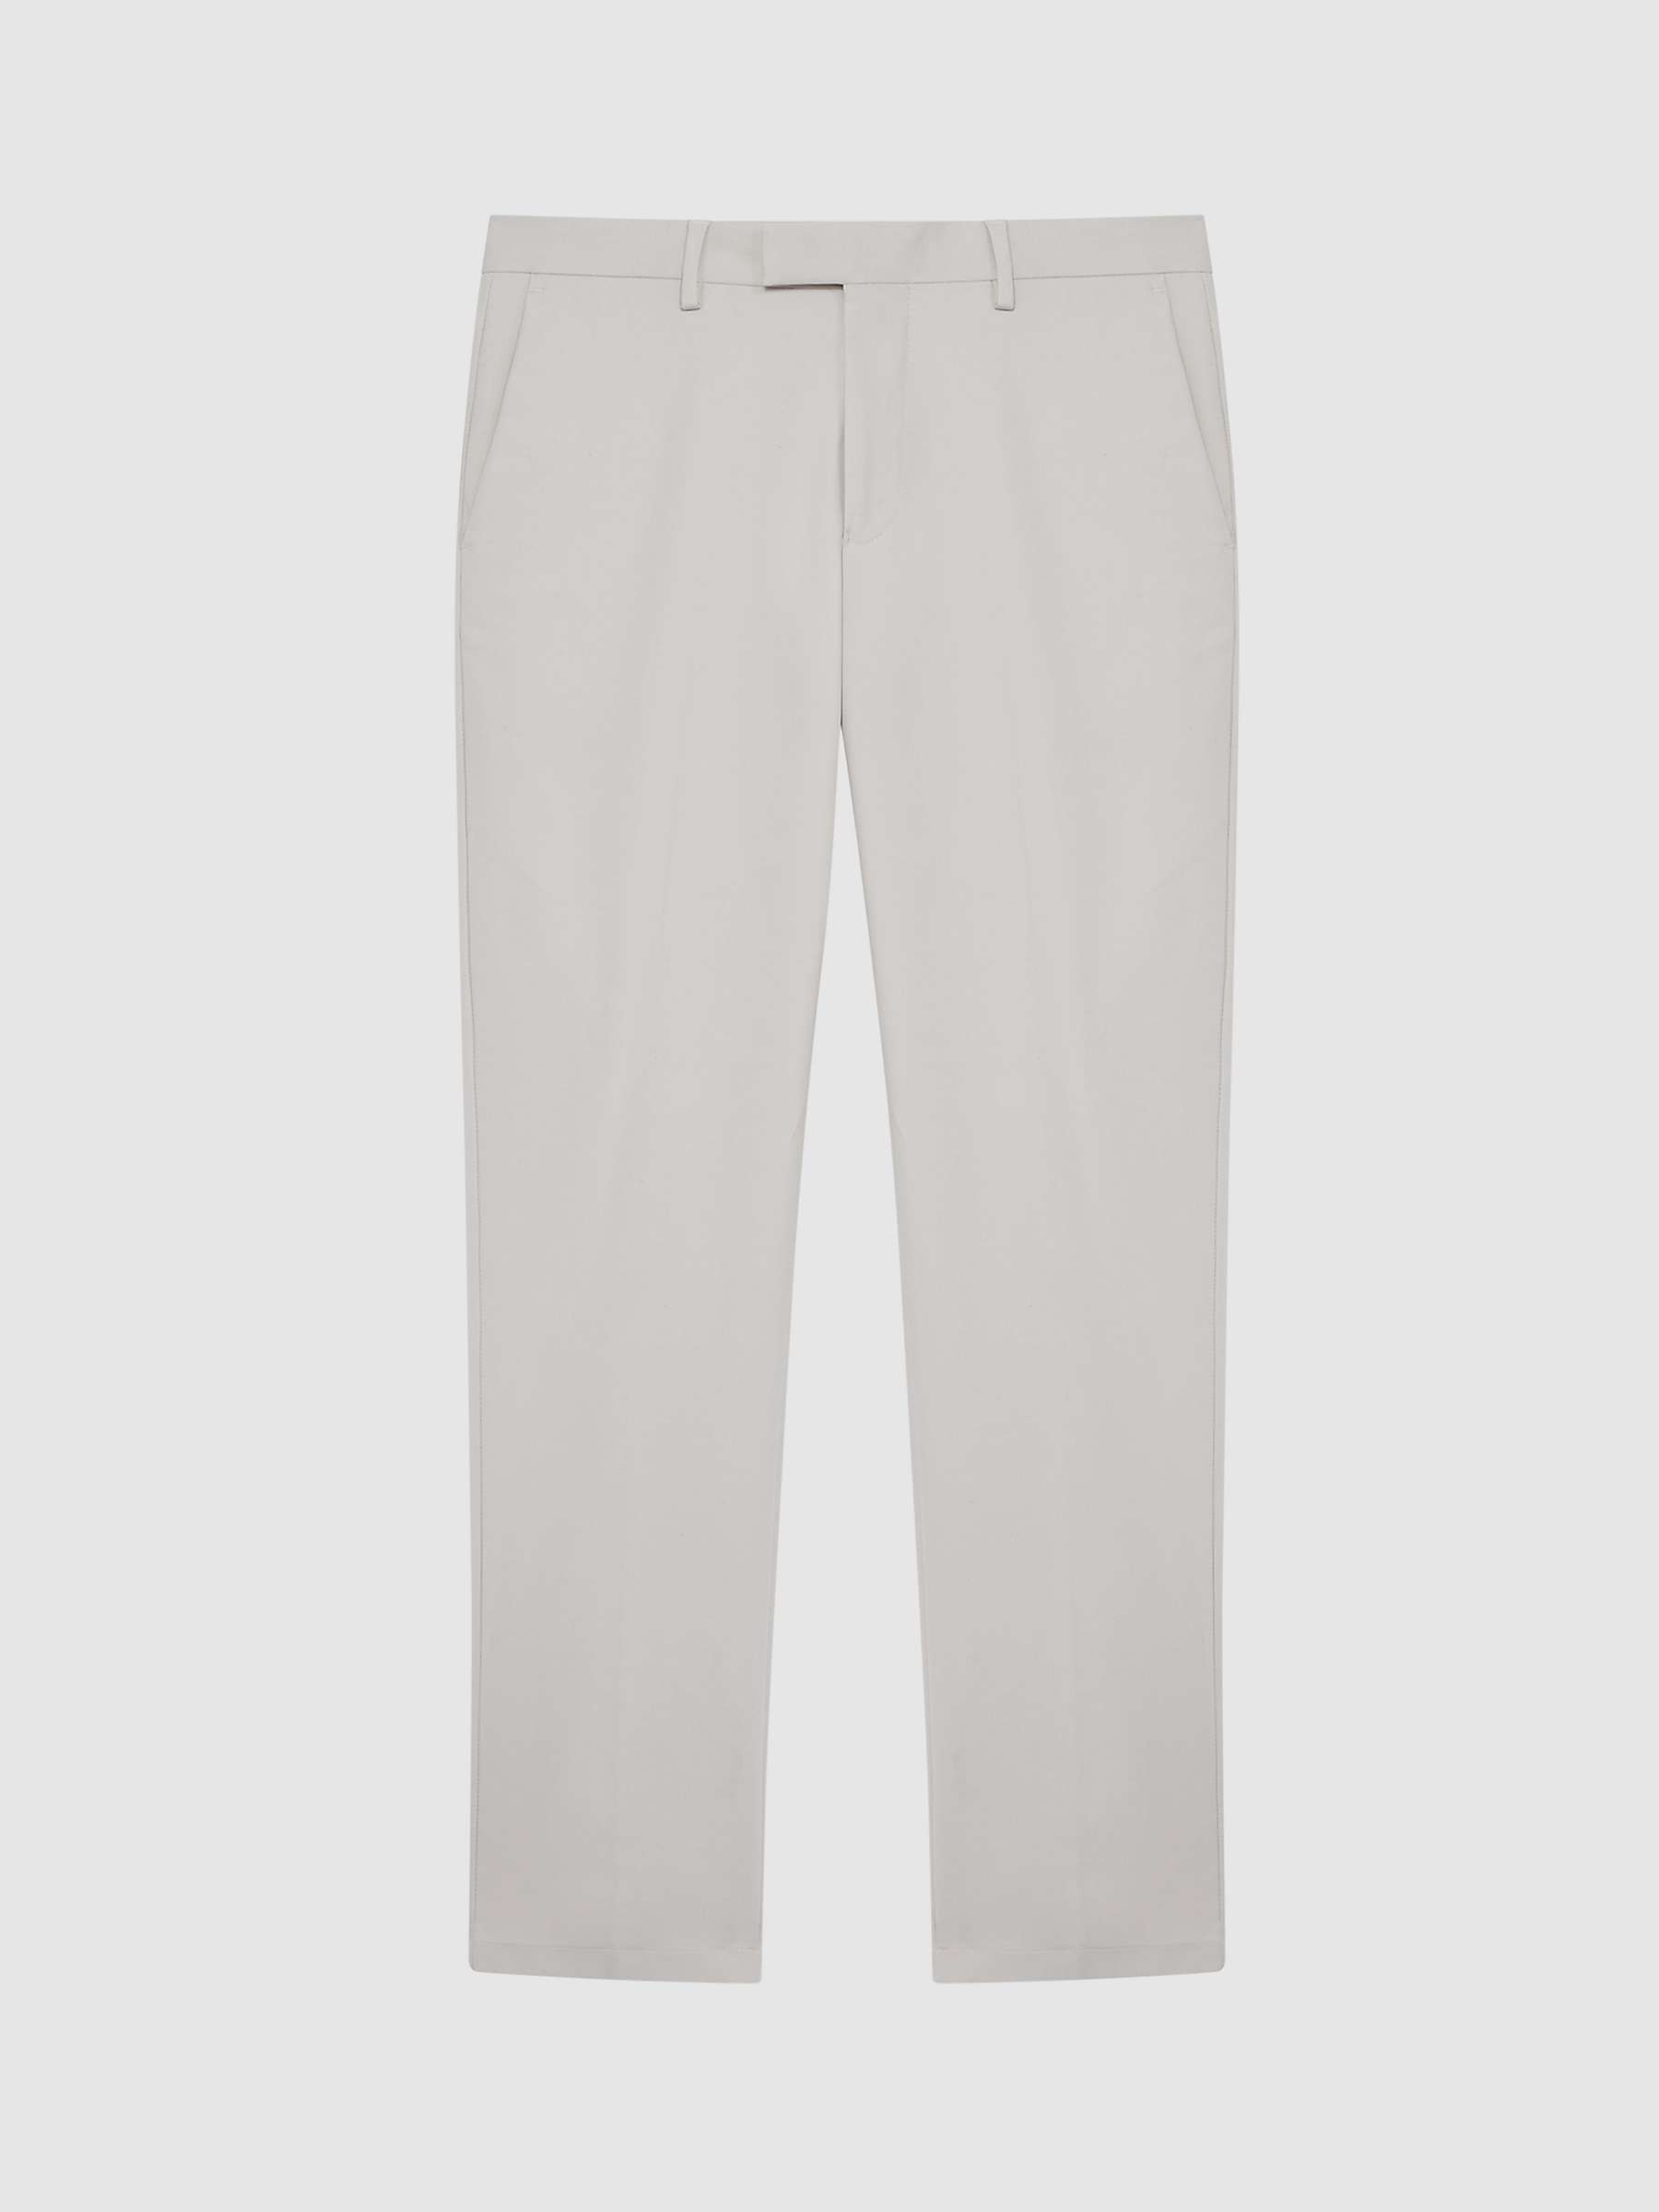 Buy Reiss Eastbury Slim Fit Cotton Blend Chino Trousers Online at johnlewis.com